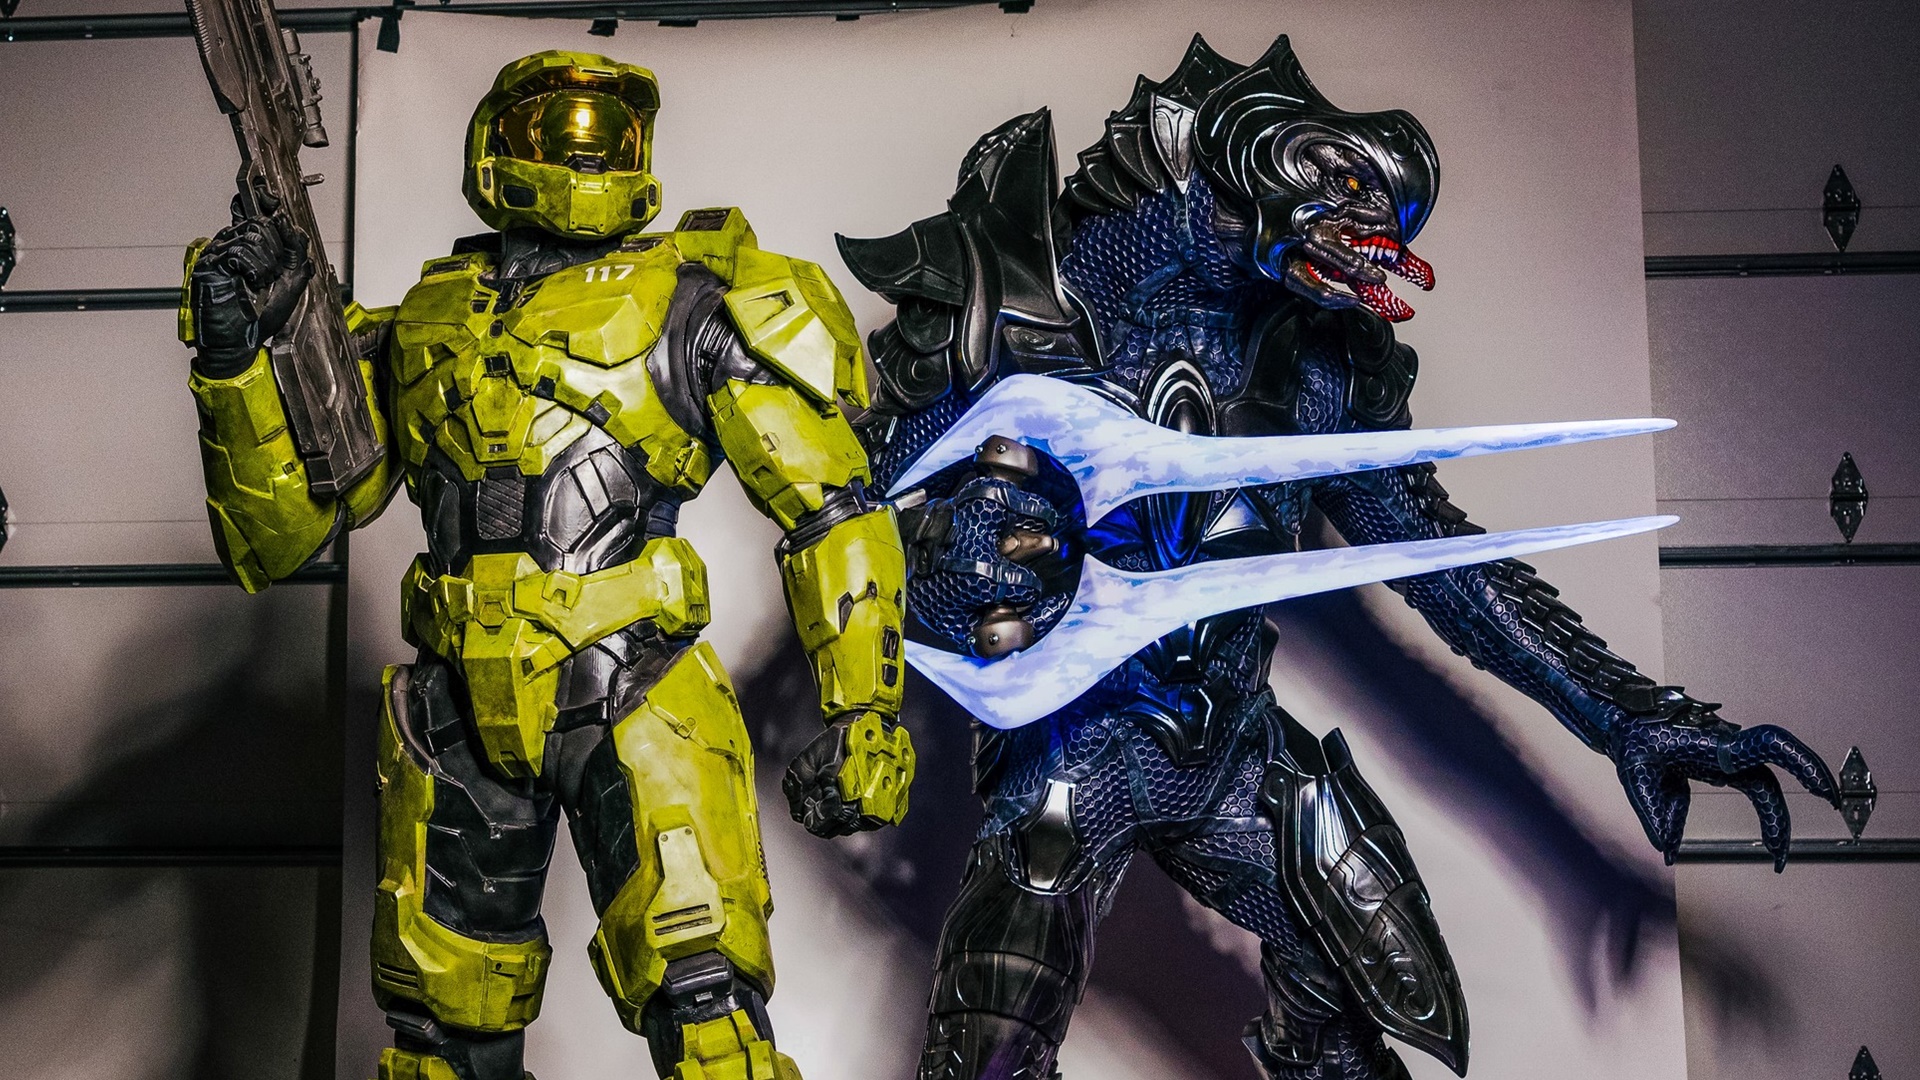 Photograph of life-sized statues of the Master Chief and the Arbiter created by Galactic Armory